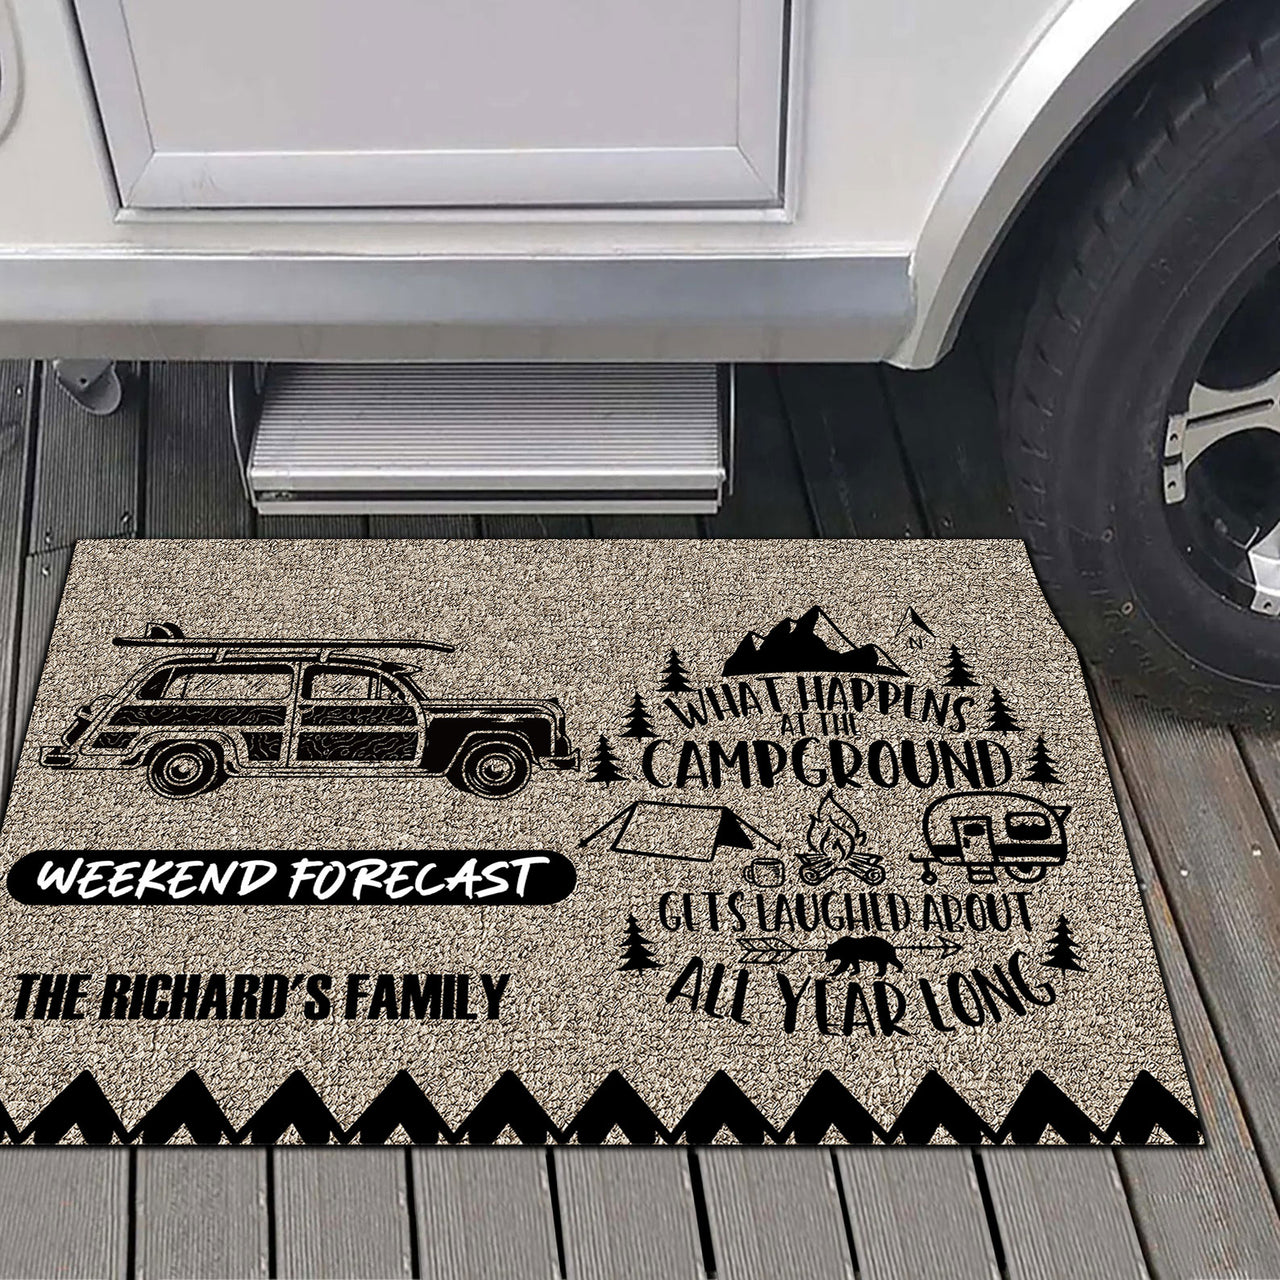 Weekend Forecast, What Happens At The Campground - Camping Doormat AB